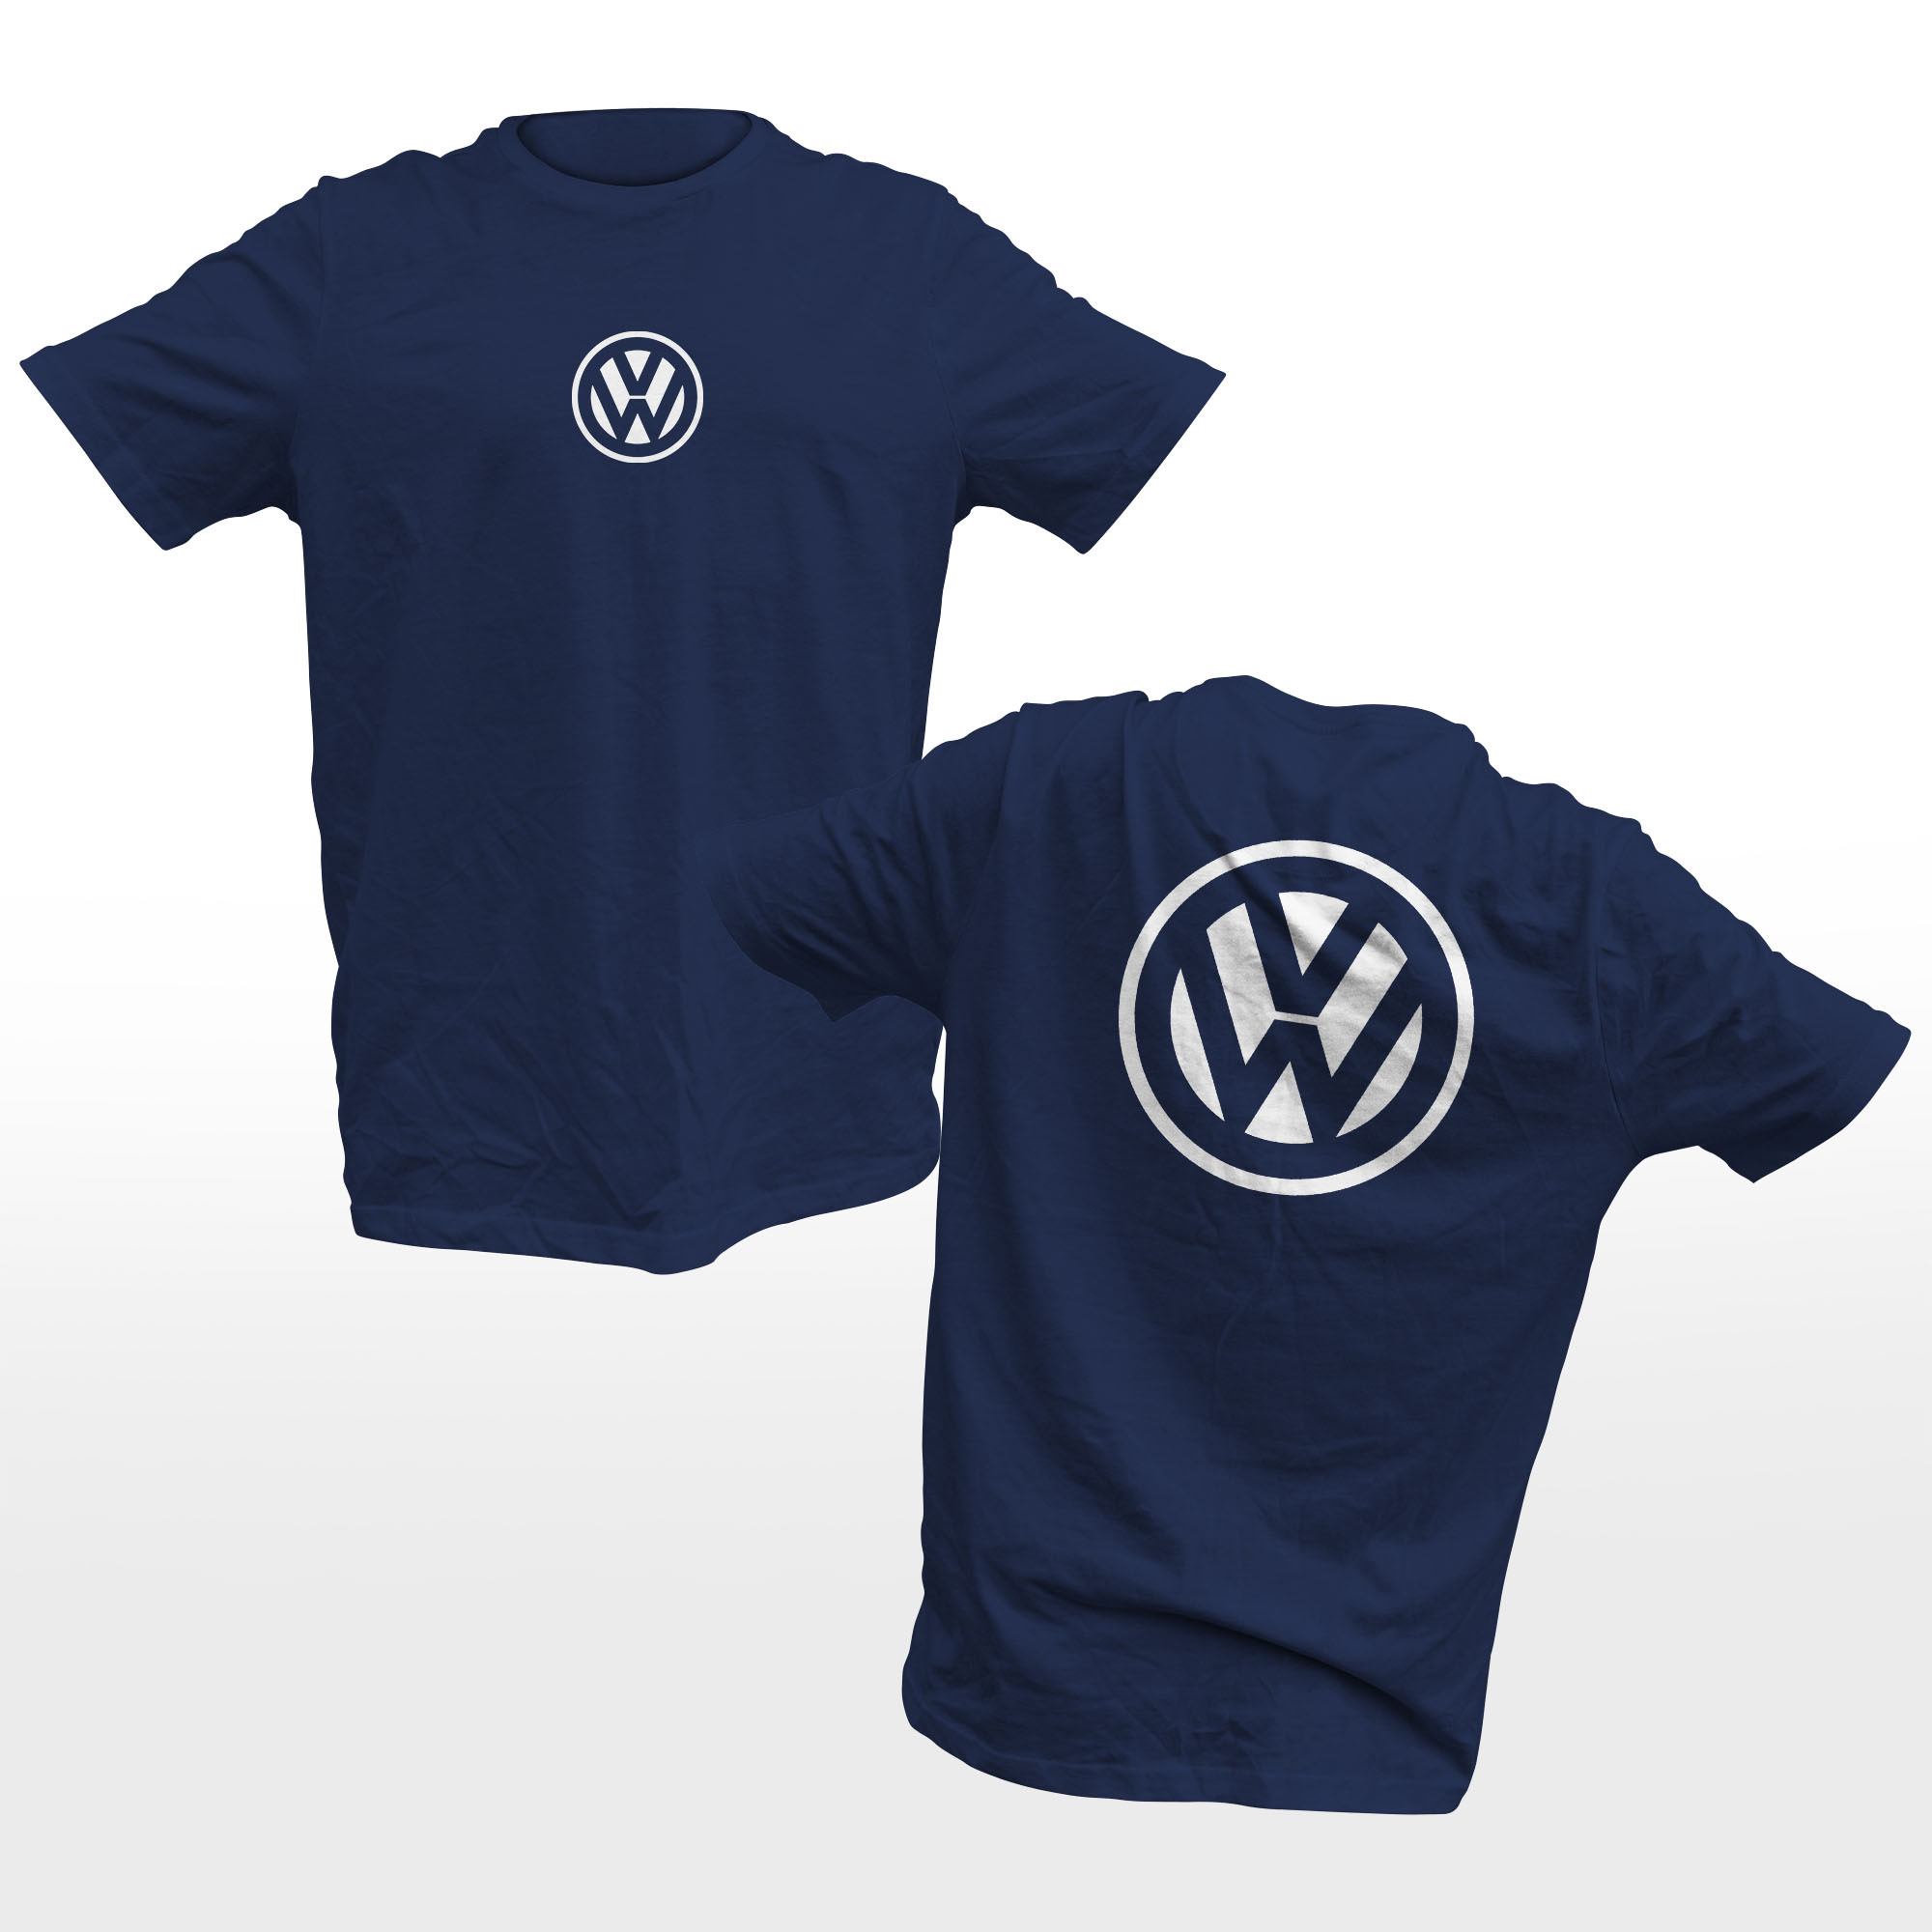 VW Volkswagen Motorsports Design Front and Back Graphic Tee 100% Cotton  Unisex Motorsports T-Shirt Black XS | PGMall